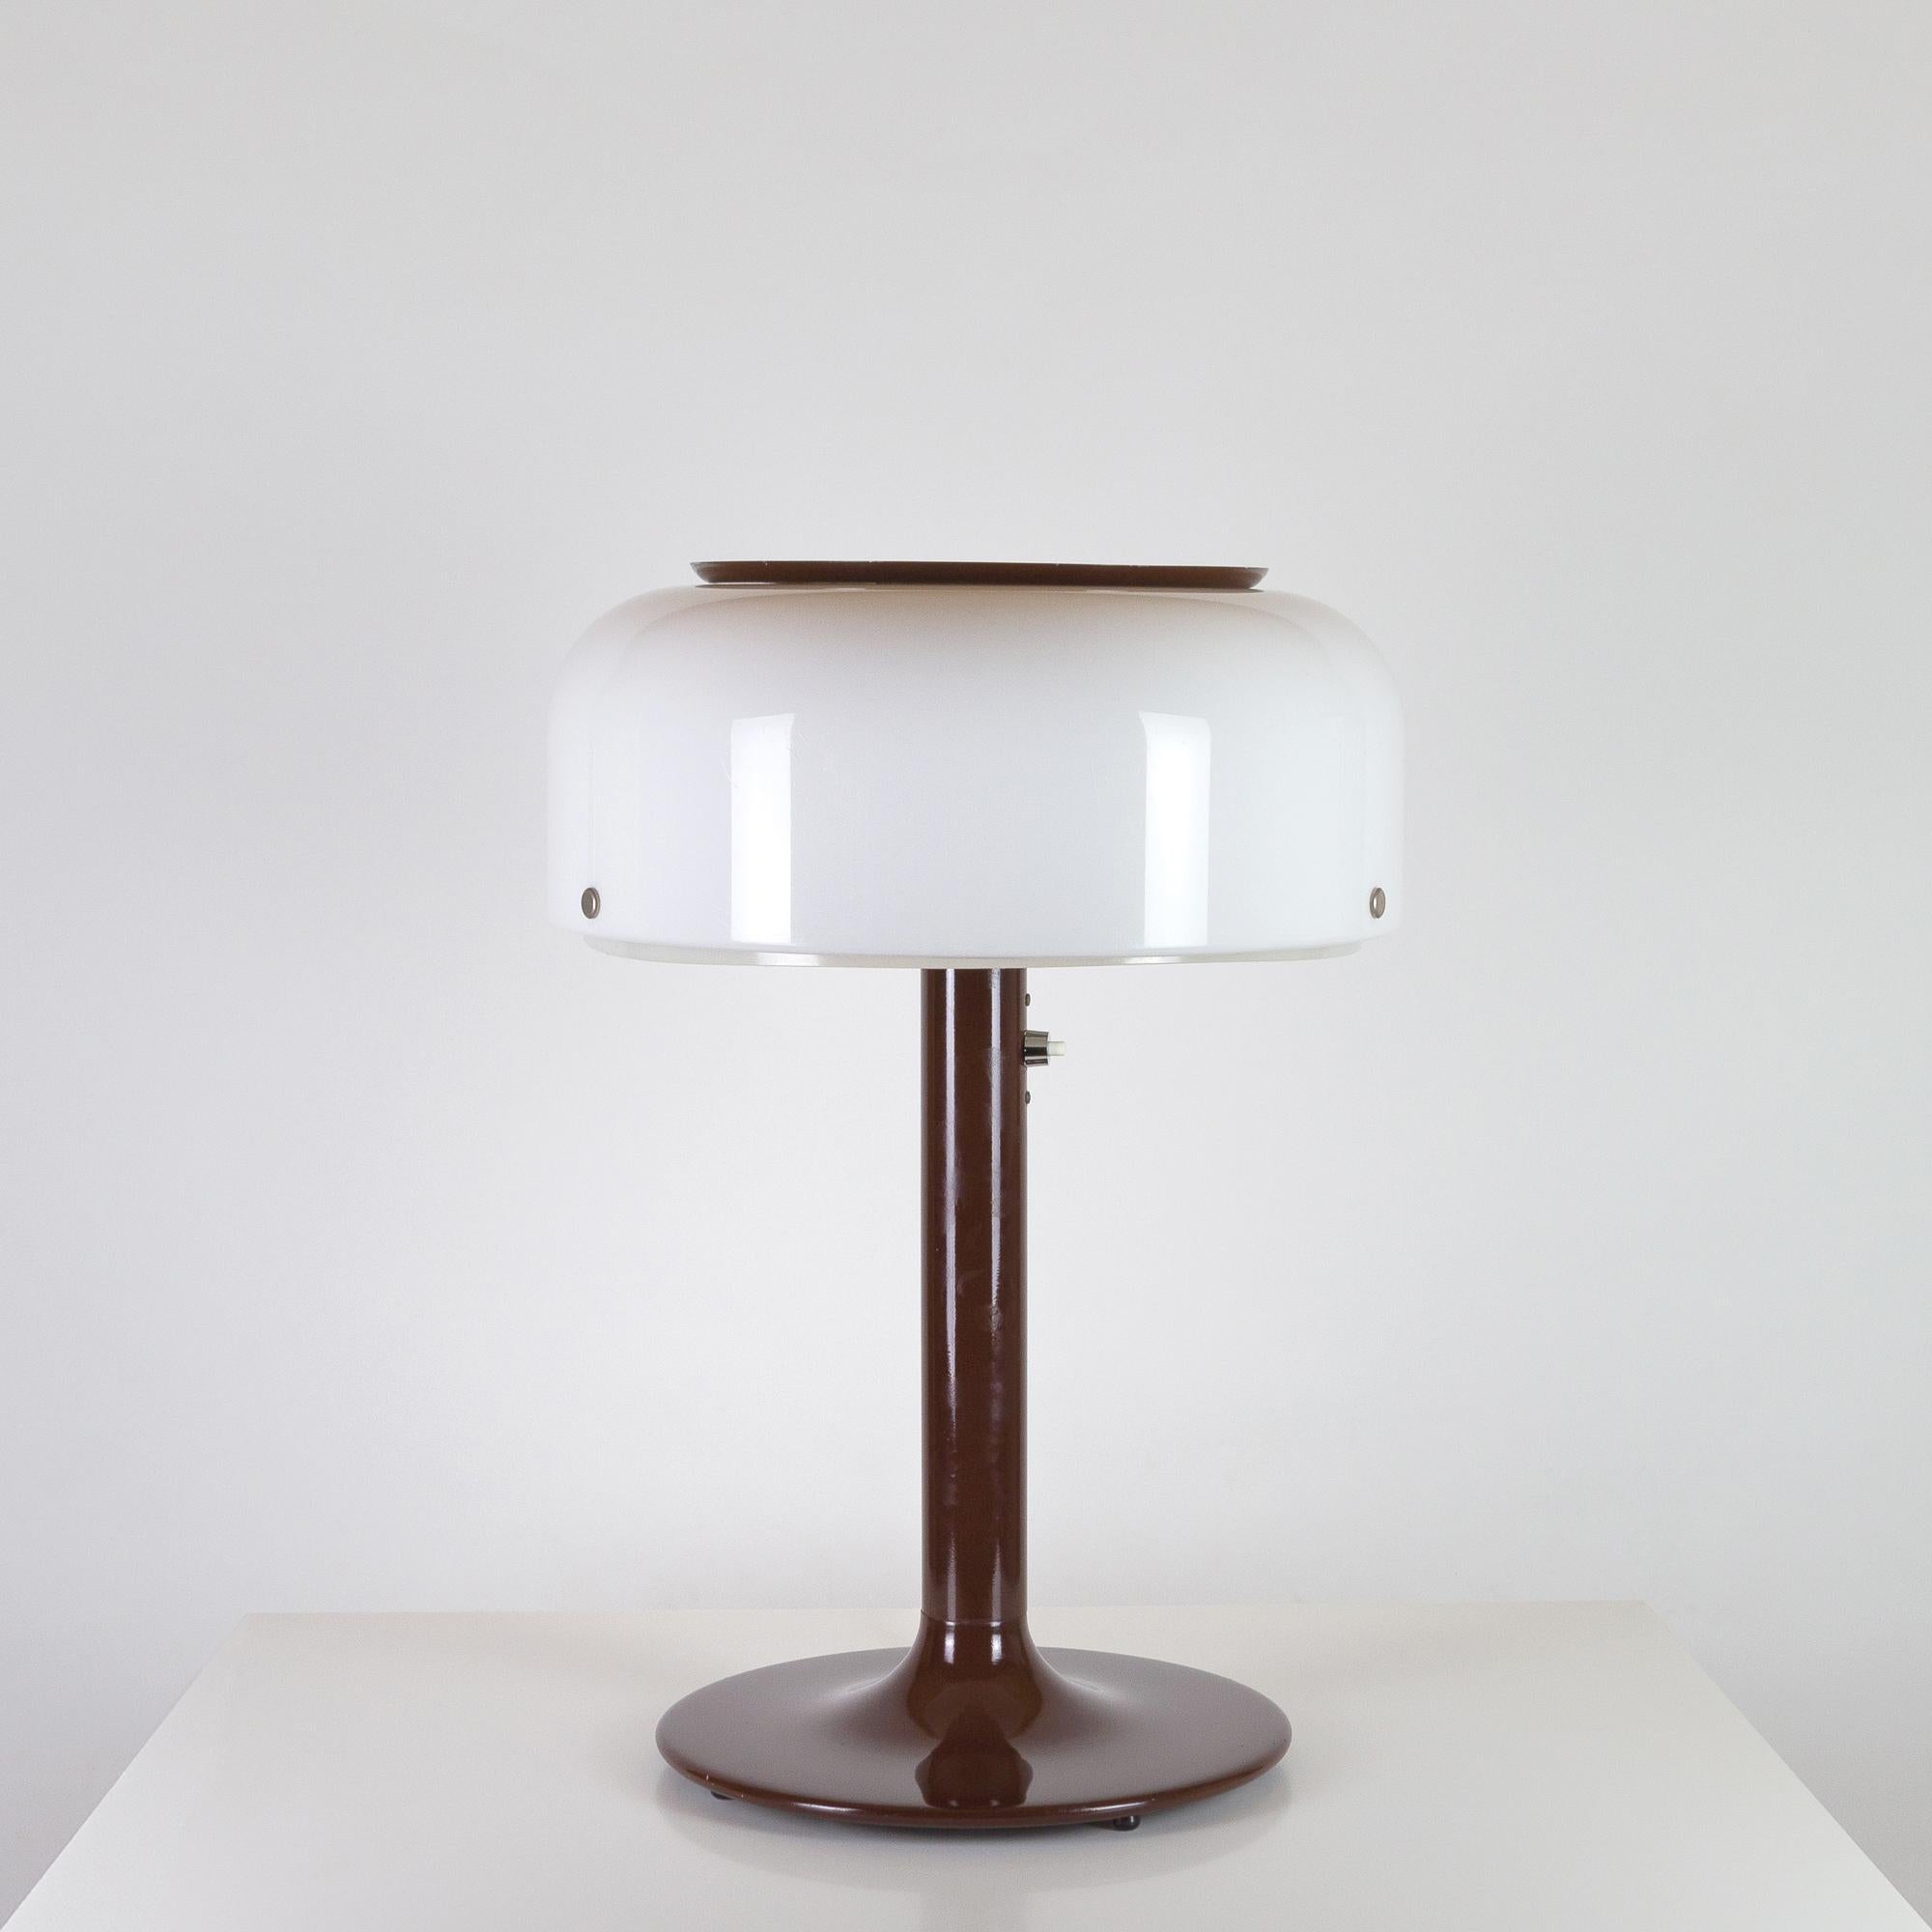 Chocolate brown Knubbling desk or table lamp by Anders Pehrson for Ateljé Lyktan, Sweden, 1970s.

  